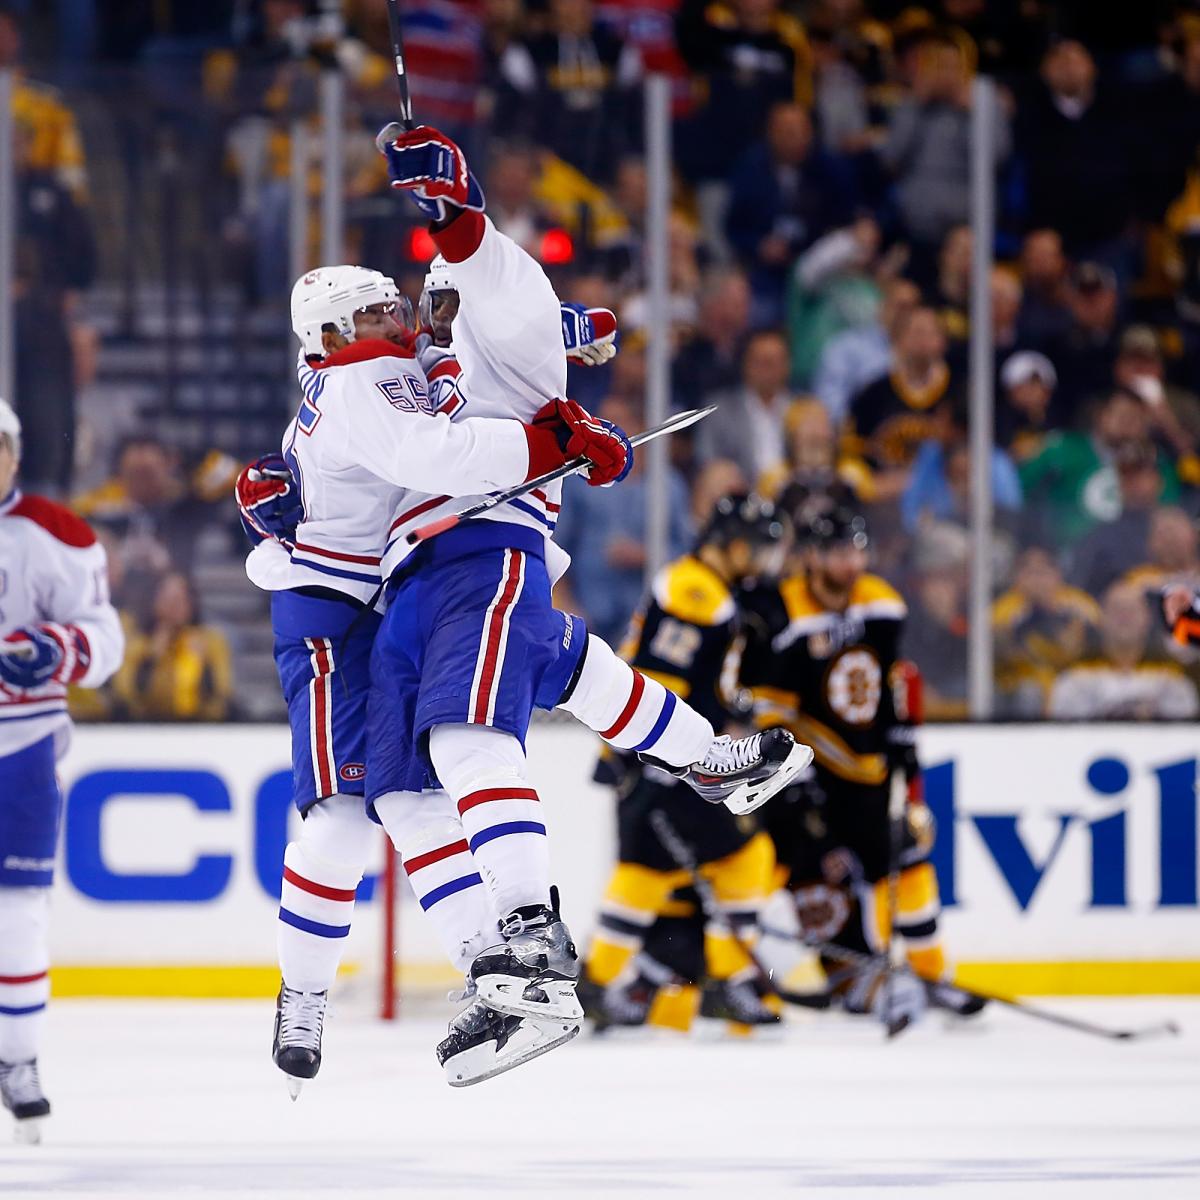 Montreal Canadiens Vs Boston Bruins Game 1 Live Score And Highlights Bleacher Report Latest News Videos And Highlights